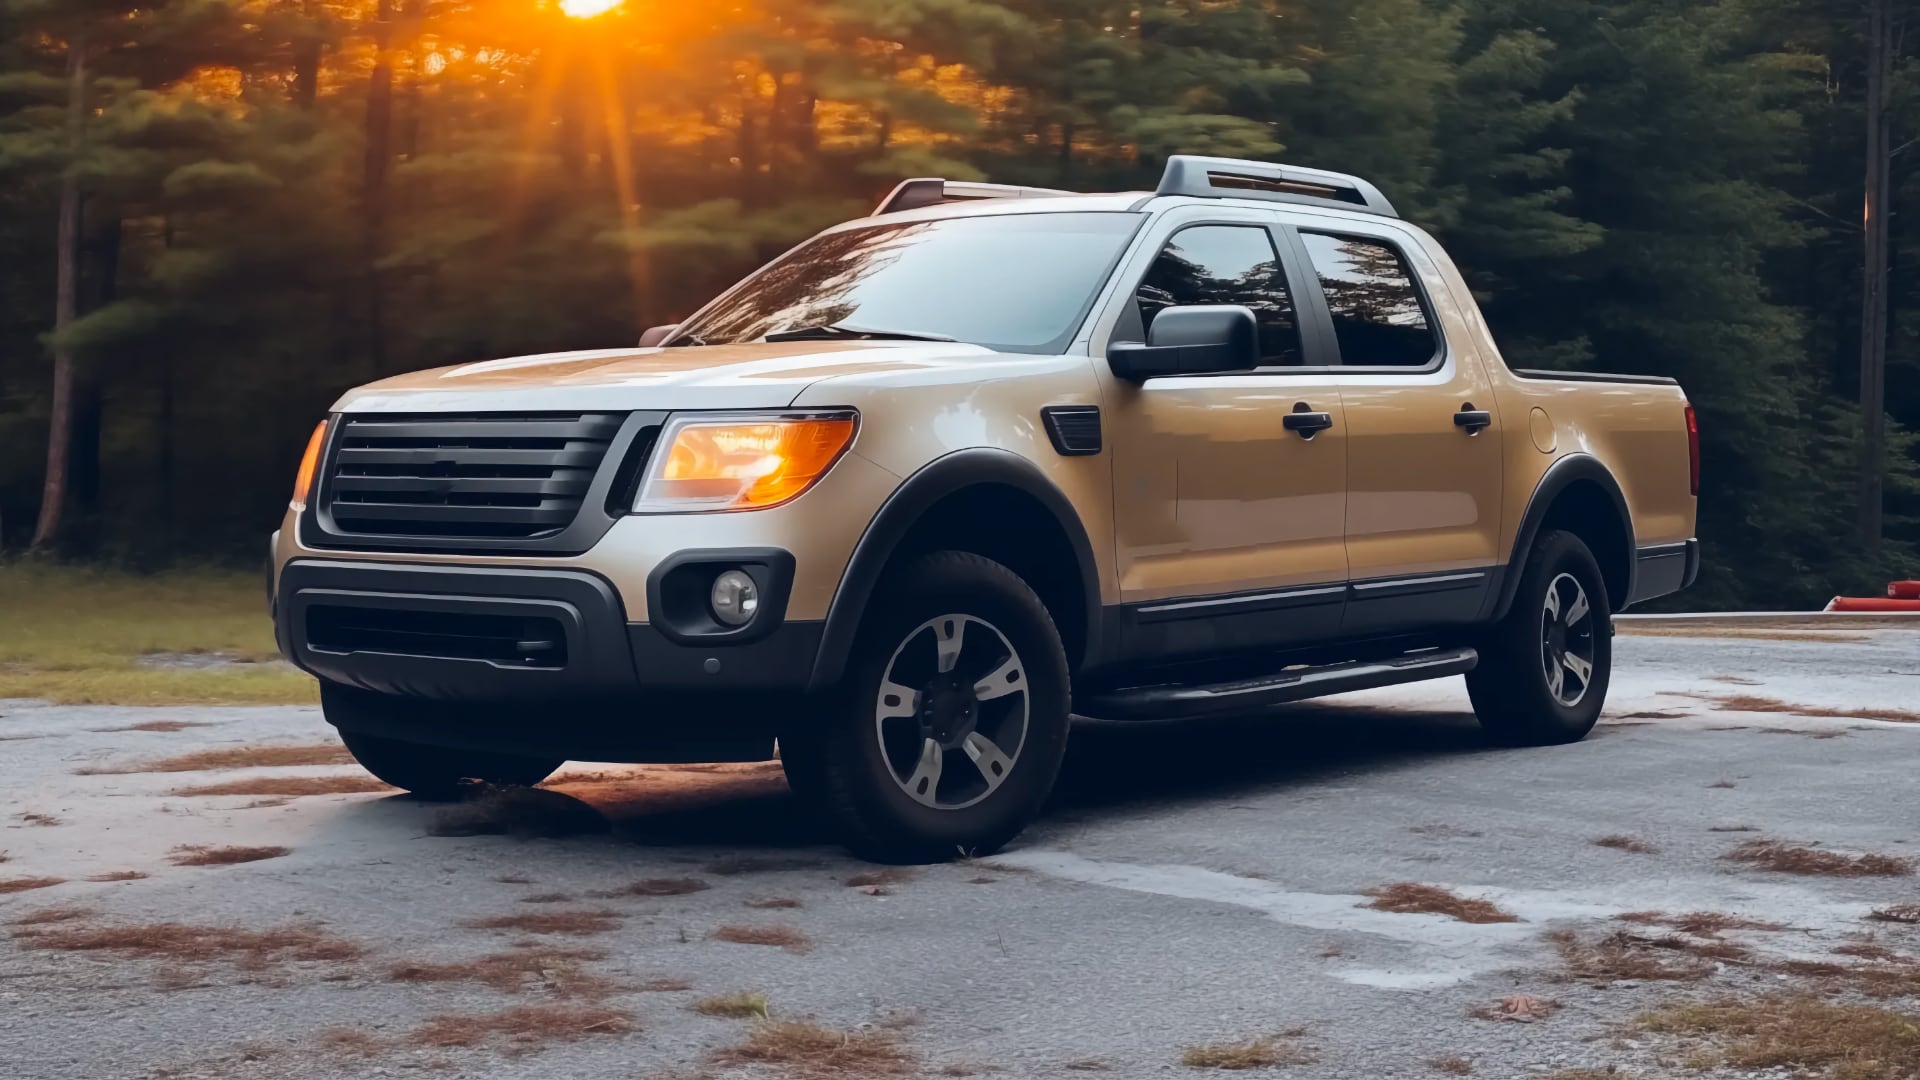 A tan Ford Ranger is parked in a parking lot.